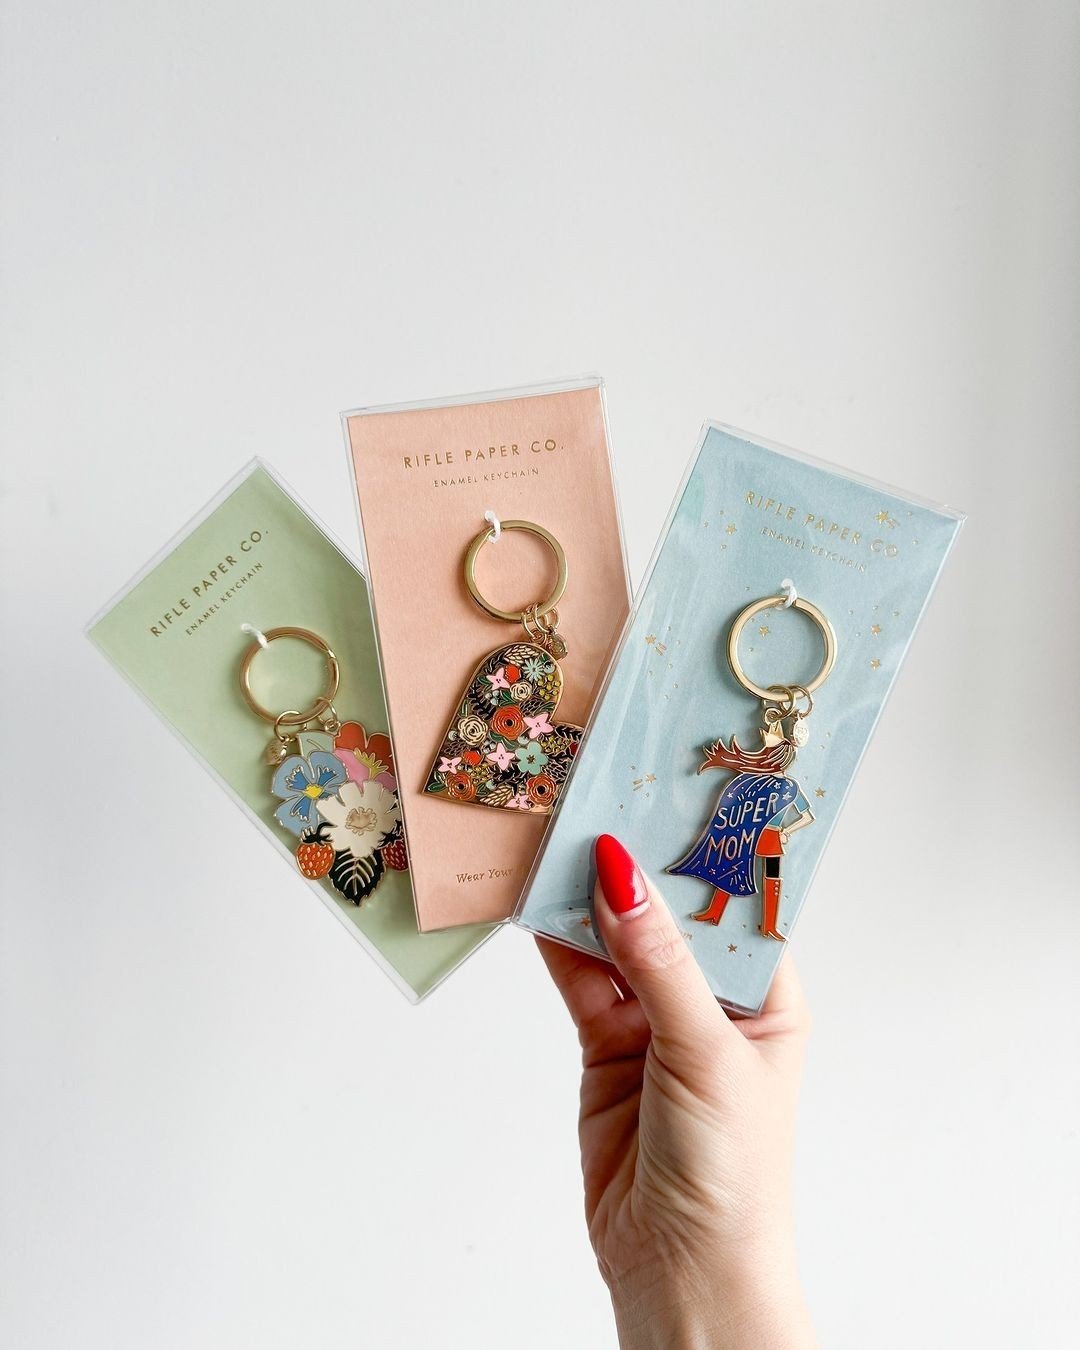 The cutest enamel keychains by @riflepaperco - perfect for the person who's always got a missing set of keys! ⁠#iykyk⁠
⁠
📸 Photo from @boucleetpapier